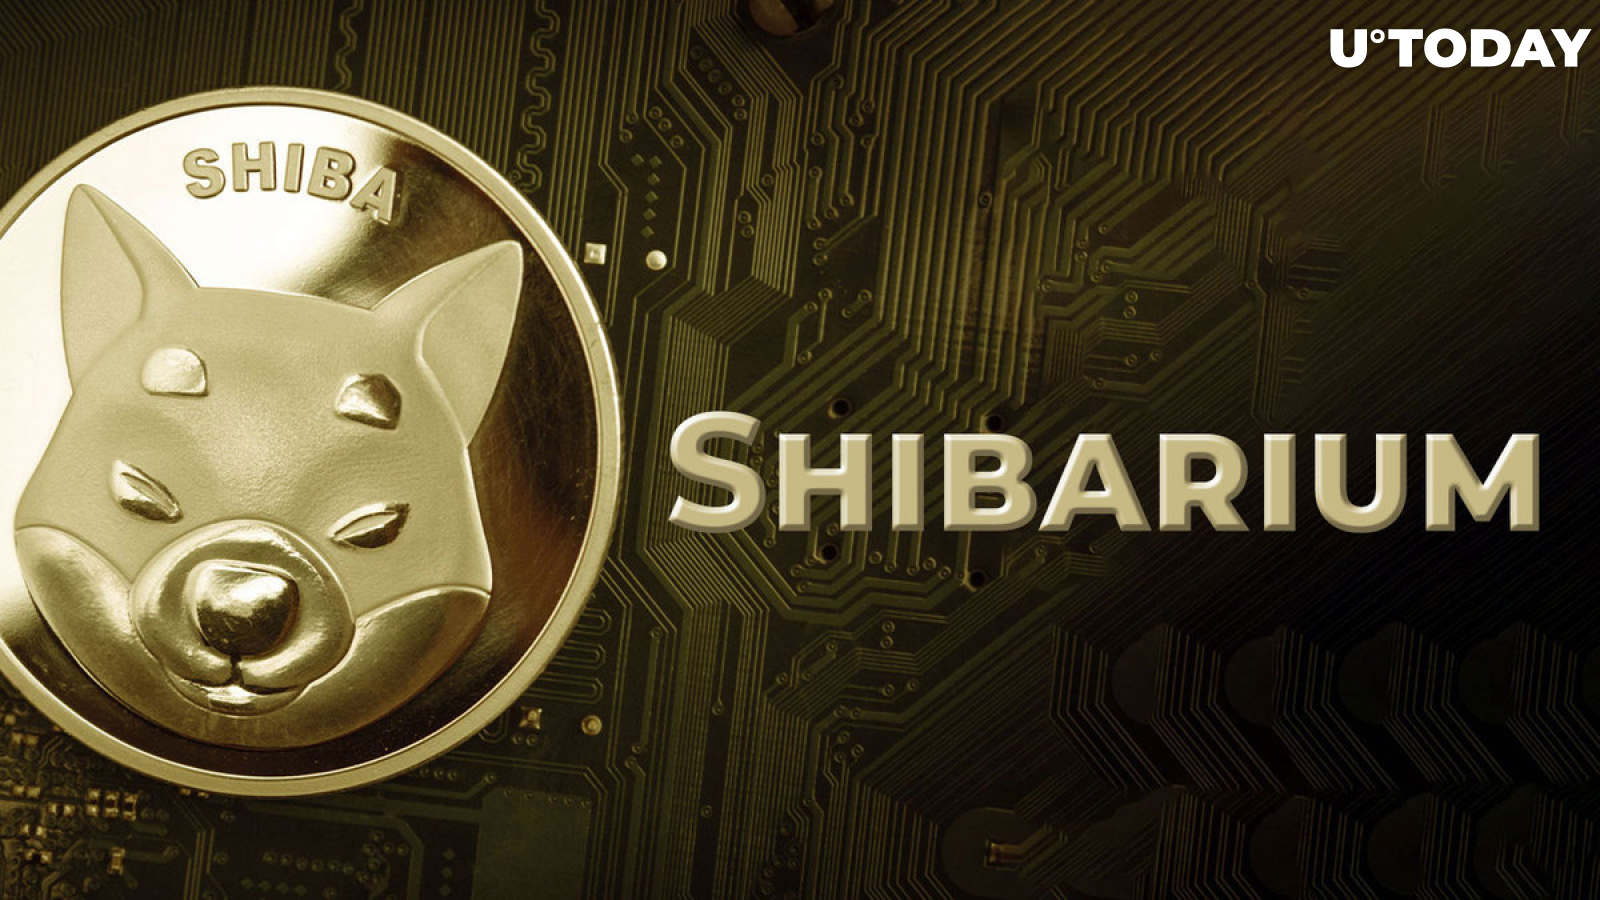 This Shibarium Project Unleashes Ambitious Vision for Shiba Inu Token